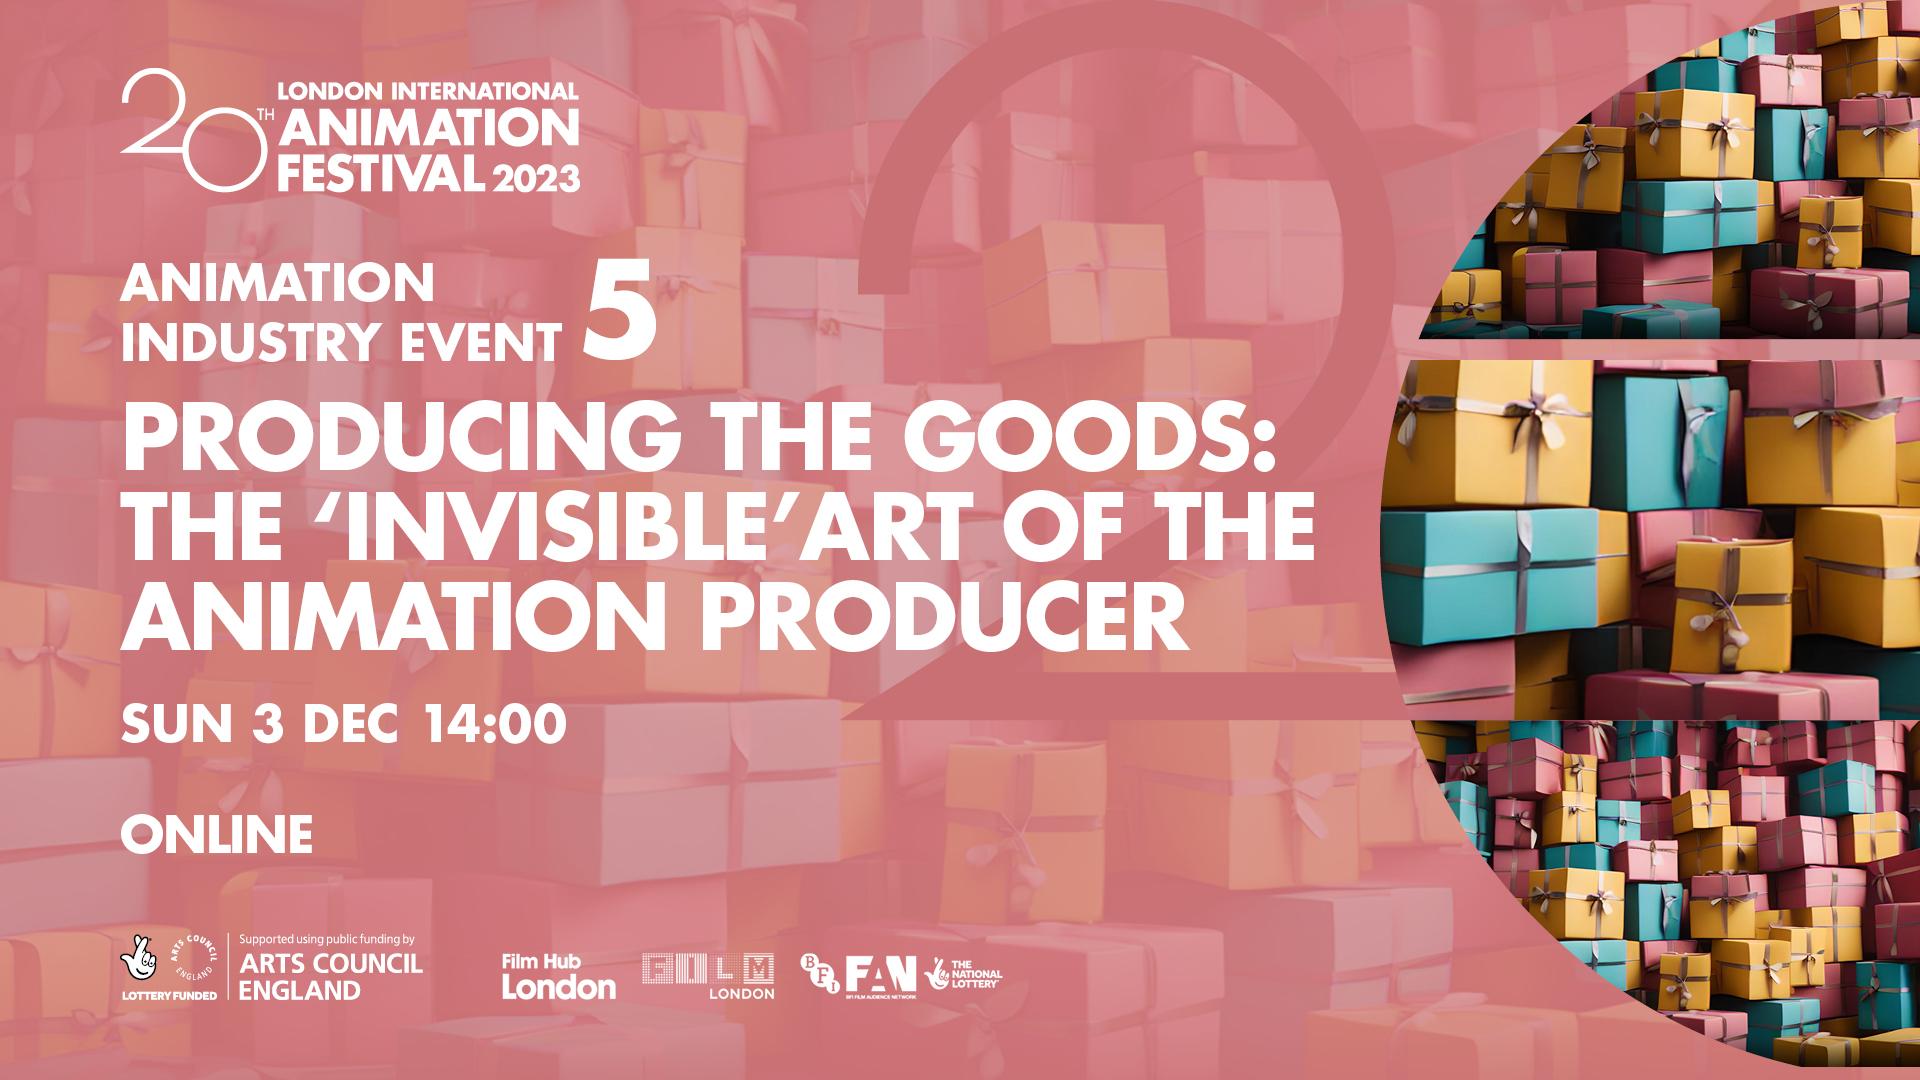 Animation Industry Event 5: Producing the Goods - The ‘Invisible’ Art of the Animation Producer